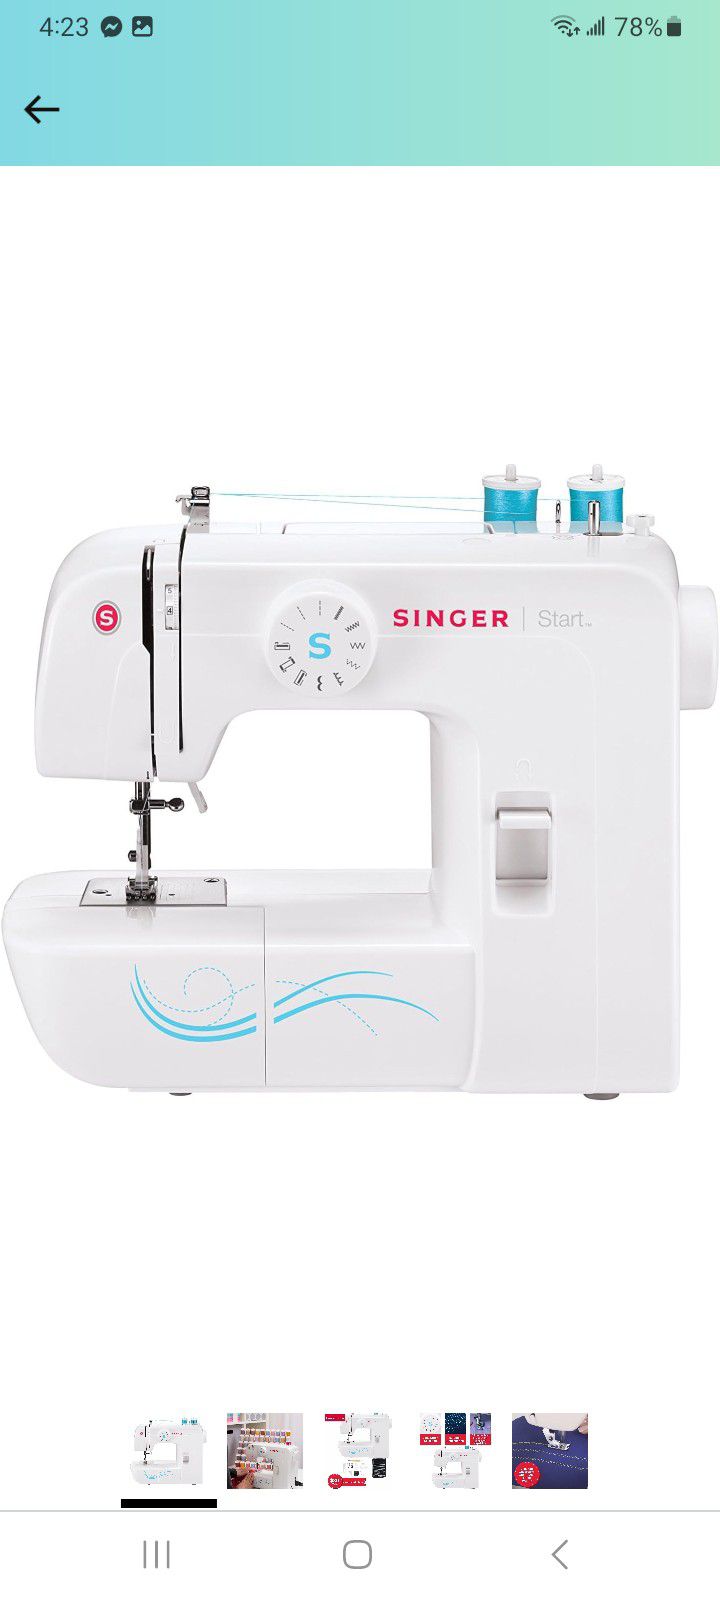 SINGER | Start 1304 Sewing Machine with 6 Built-in Stitches, Free Arm Sewing Machine - Best Sewing Machine for Beginners